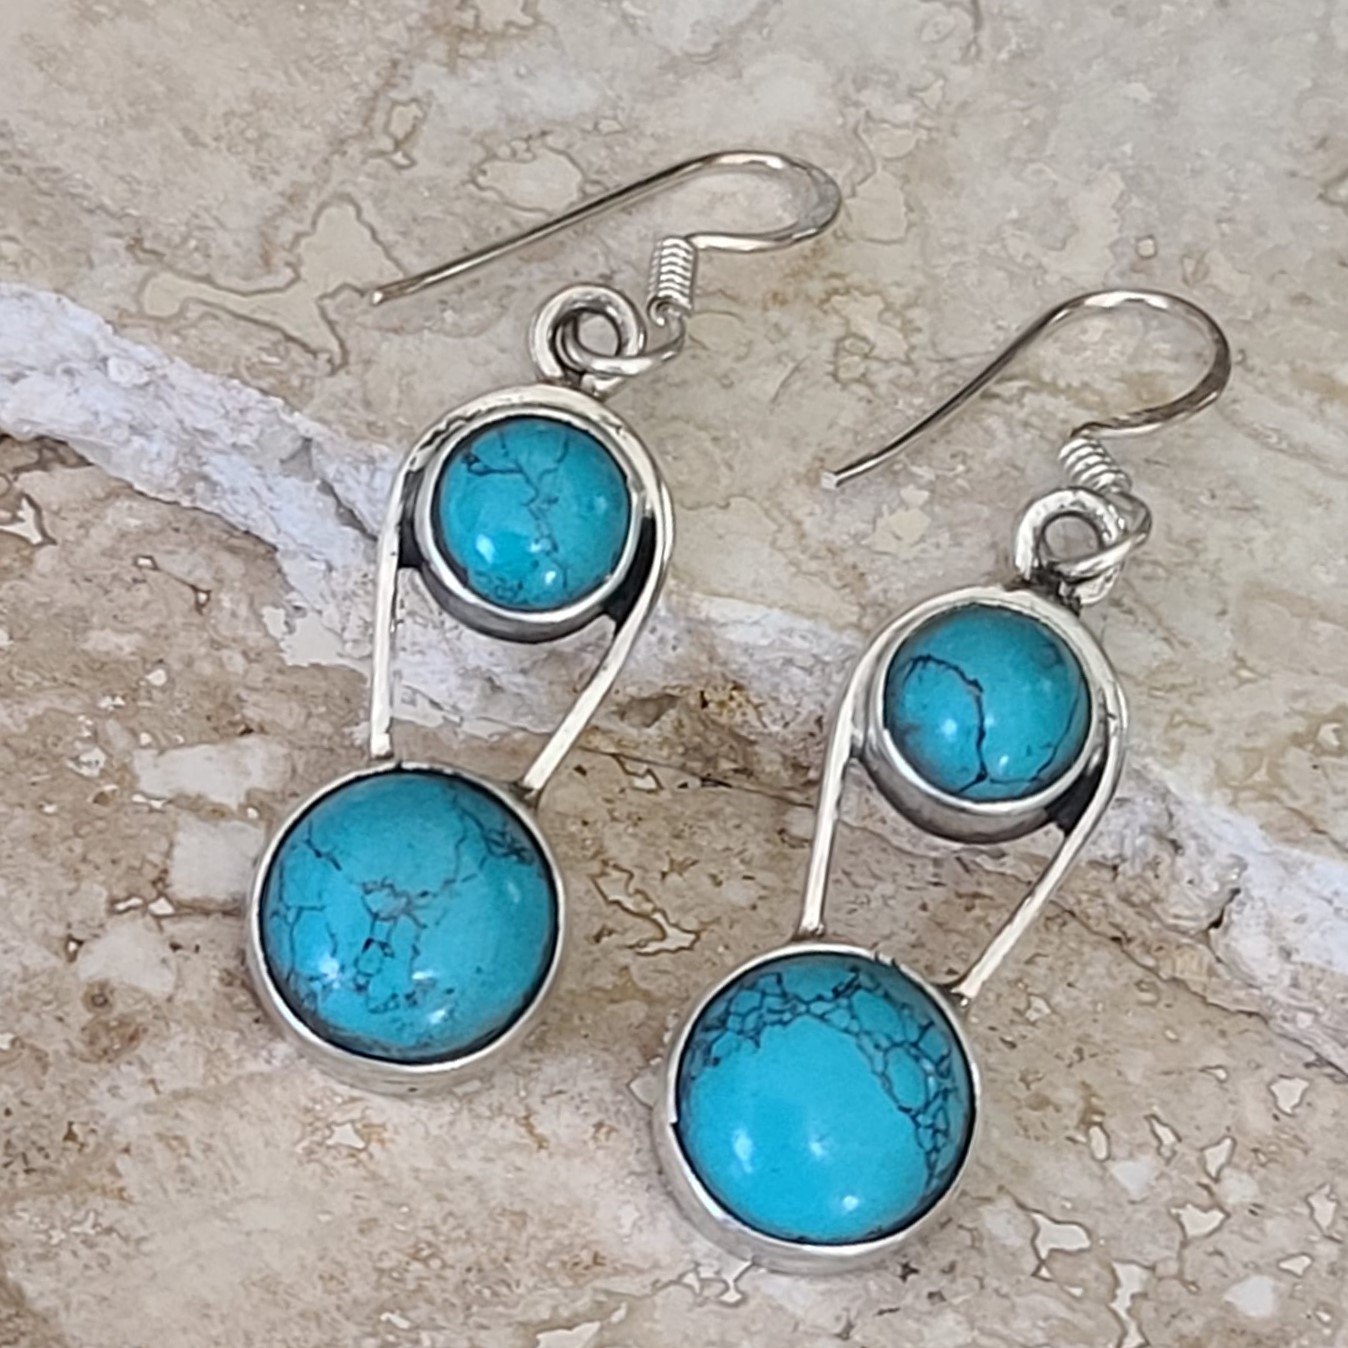 Turquoise Howalite & 925 Sterling Silver Earrings - Click Image to Close